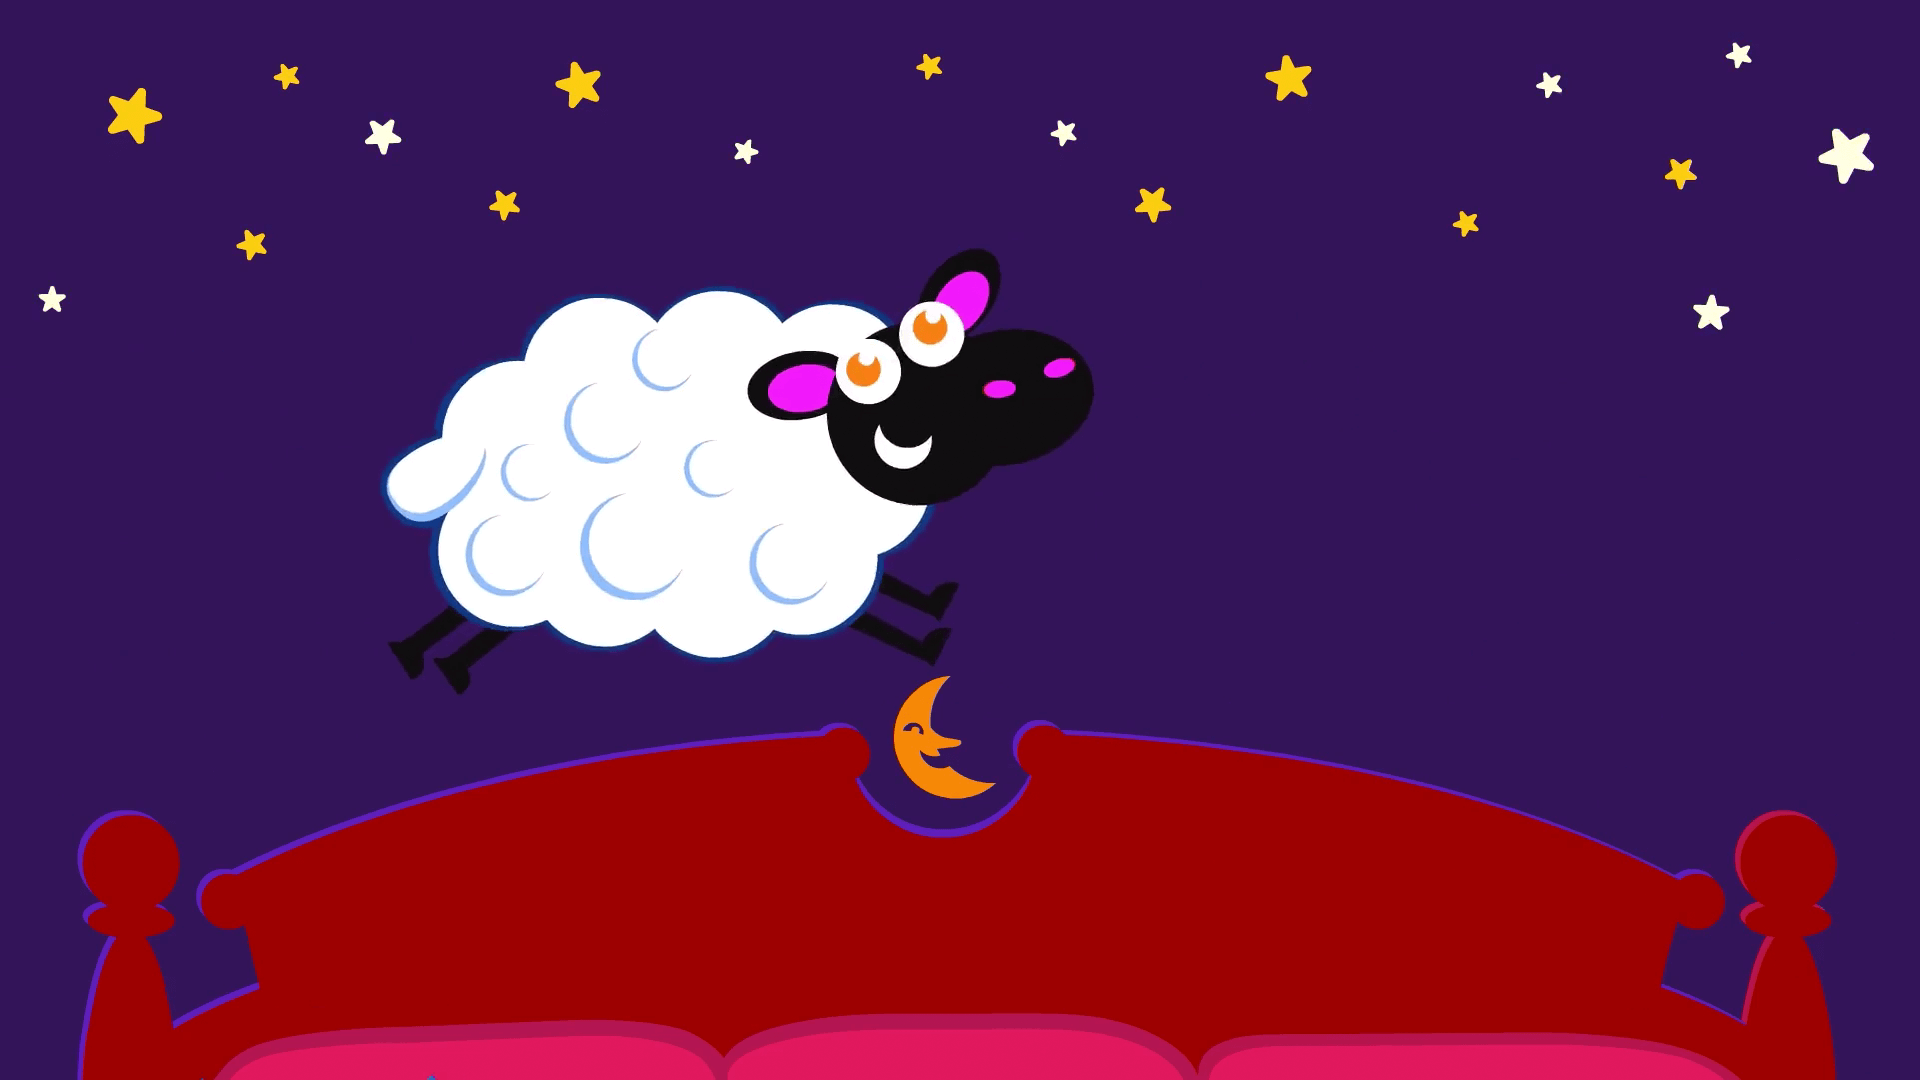 sheep jumps over bed in Kiki's Music Time music video for toddlers on KneeBouncers, bedtime song